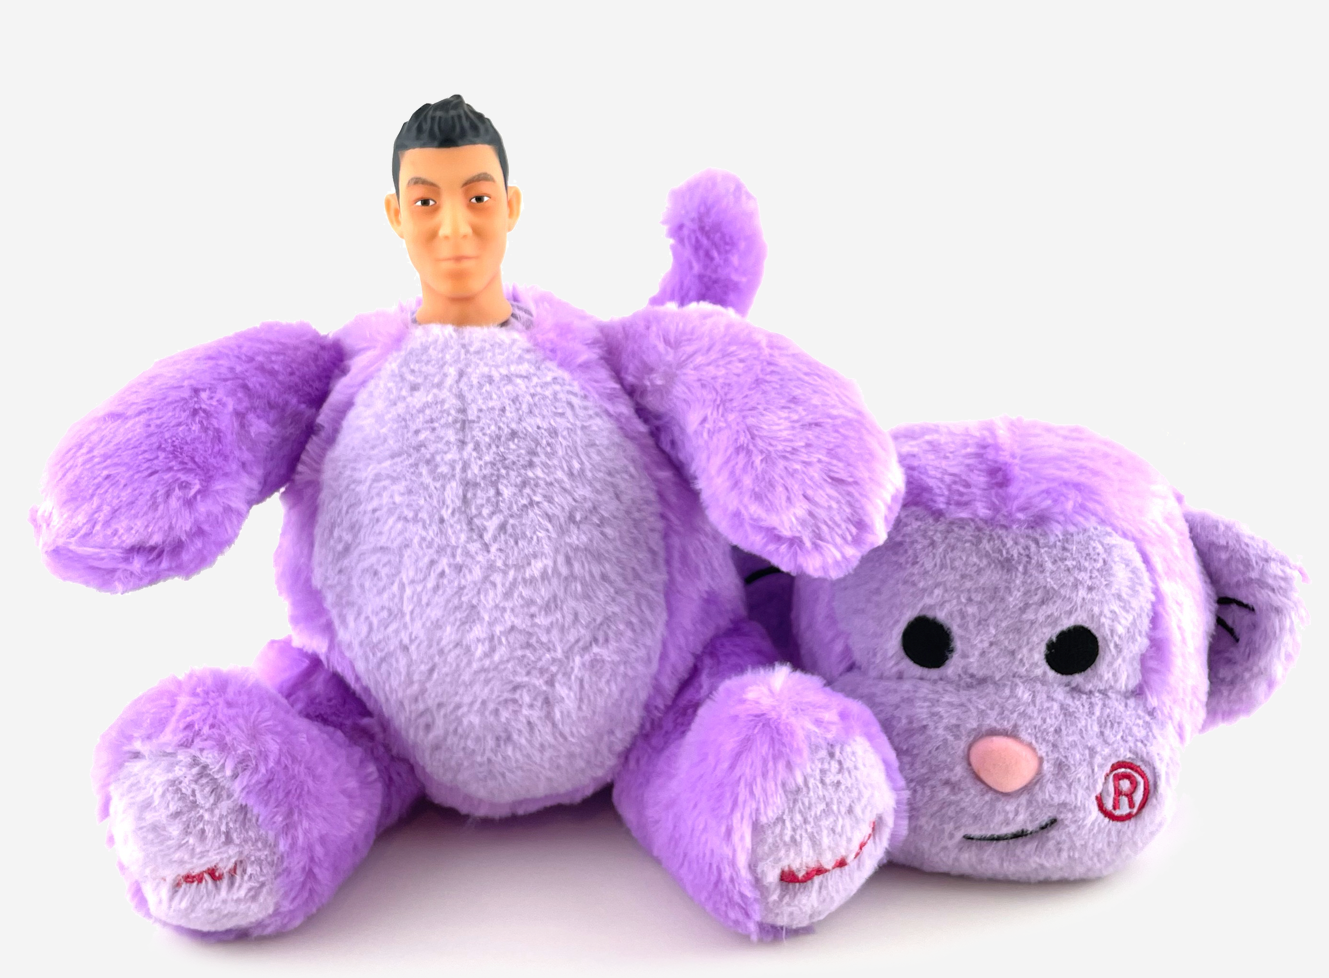 The tongue-in-cheek collectibles resemble Edison Chen dressed up as a plush toy. Photo: Objective Collectibles